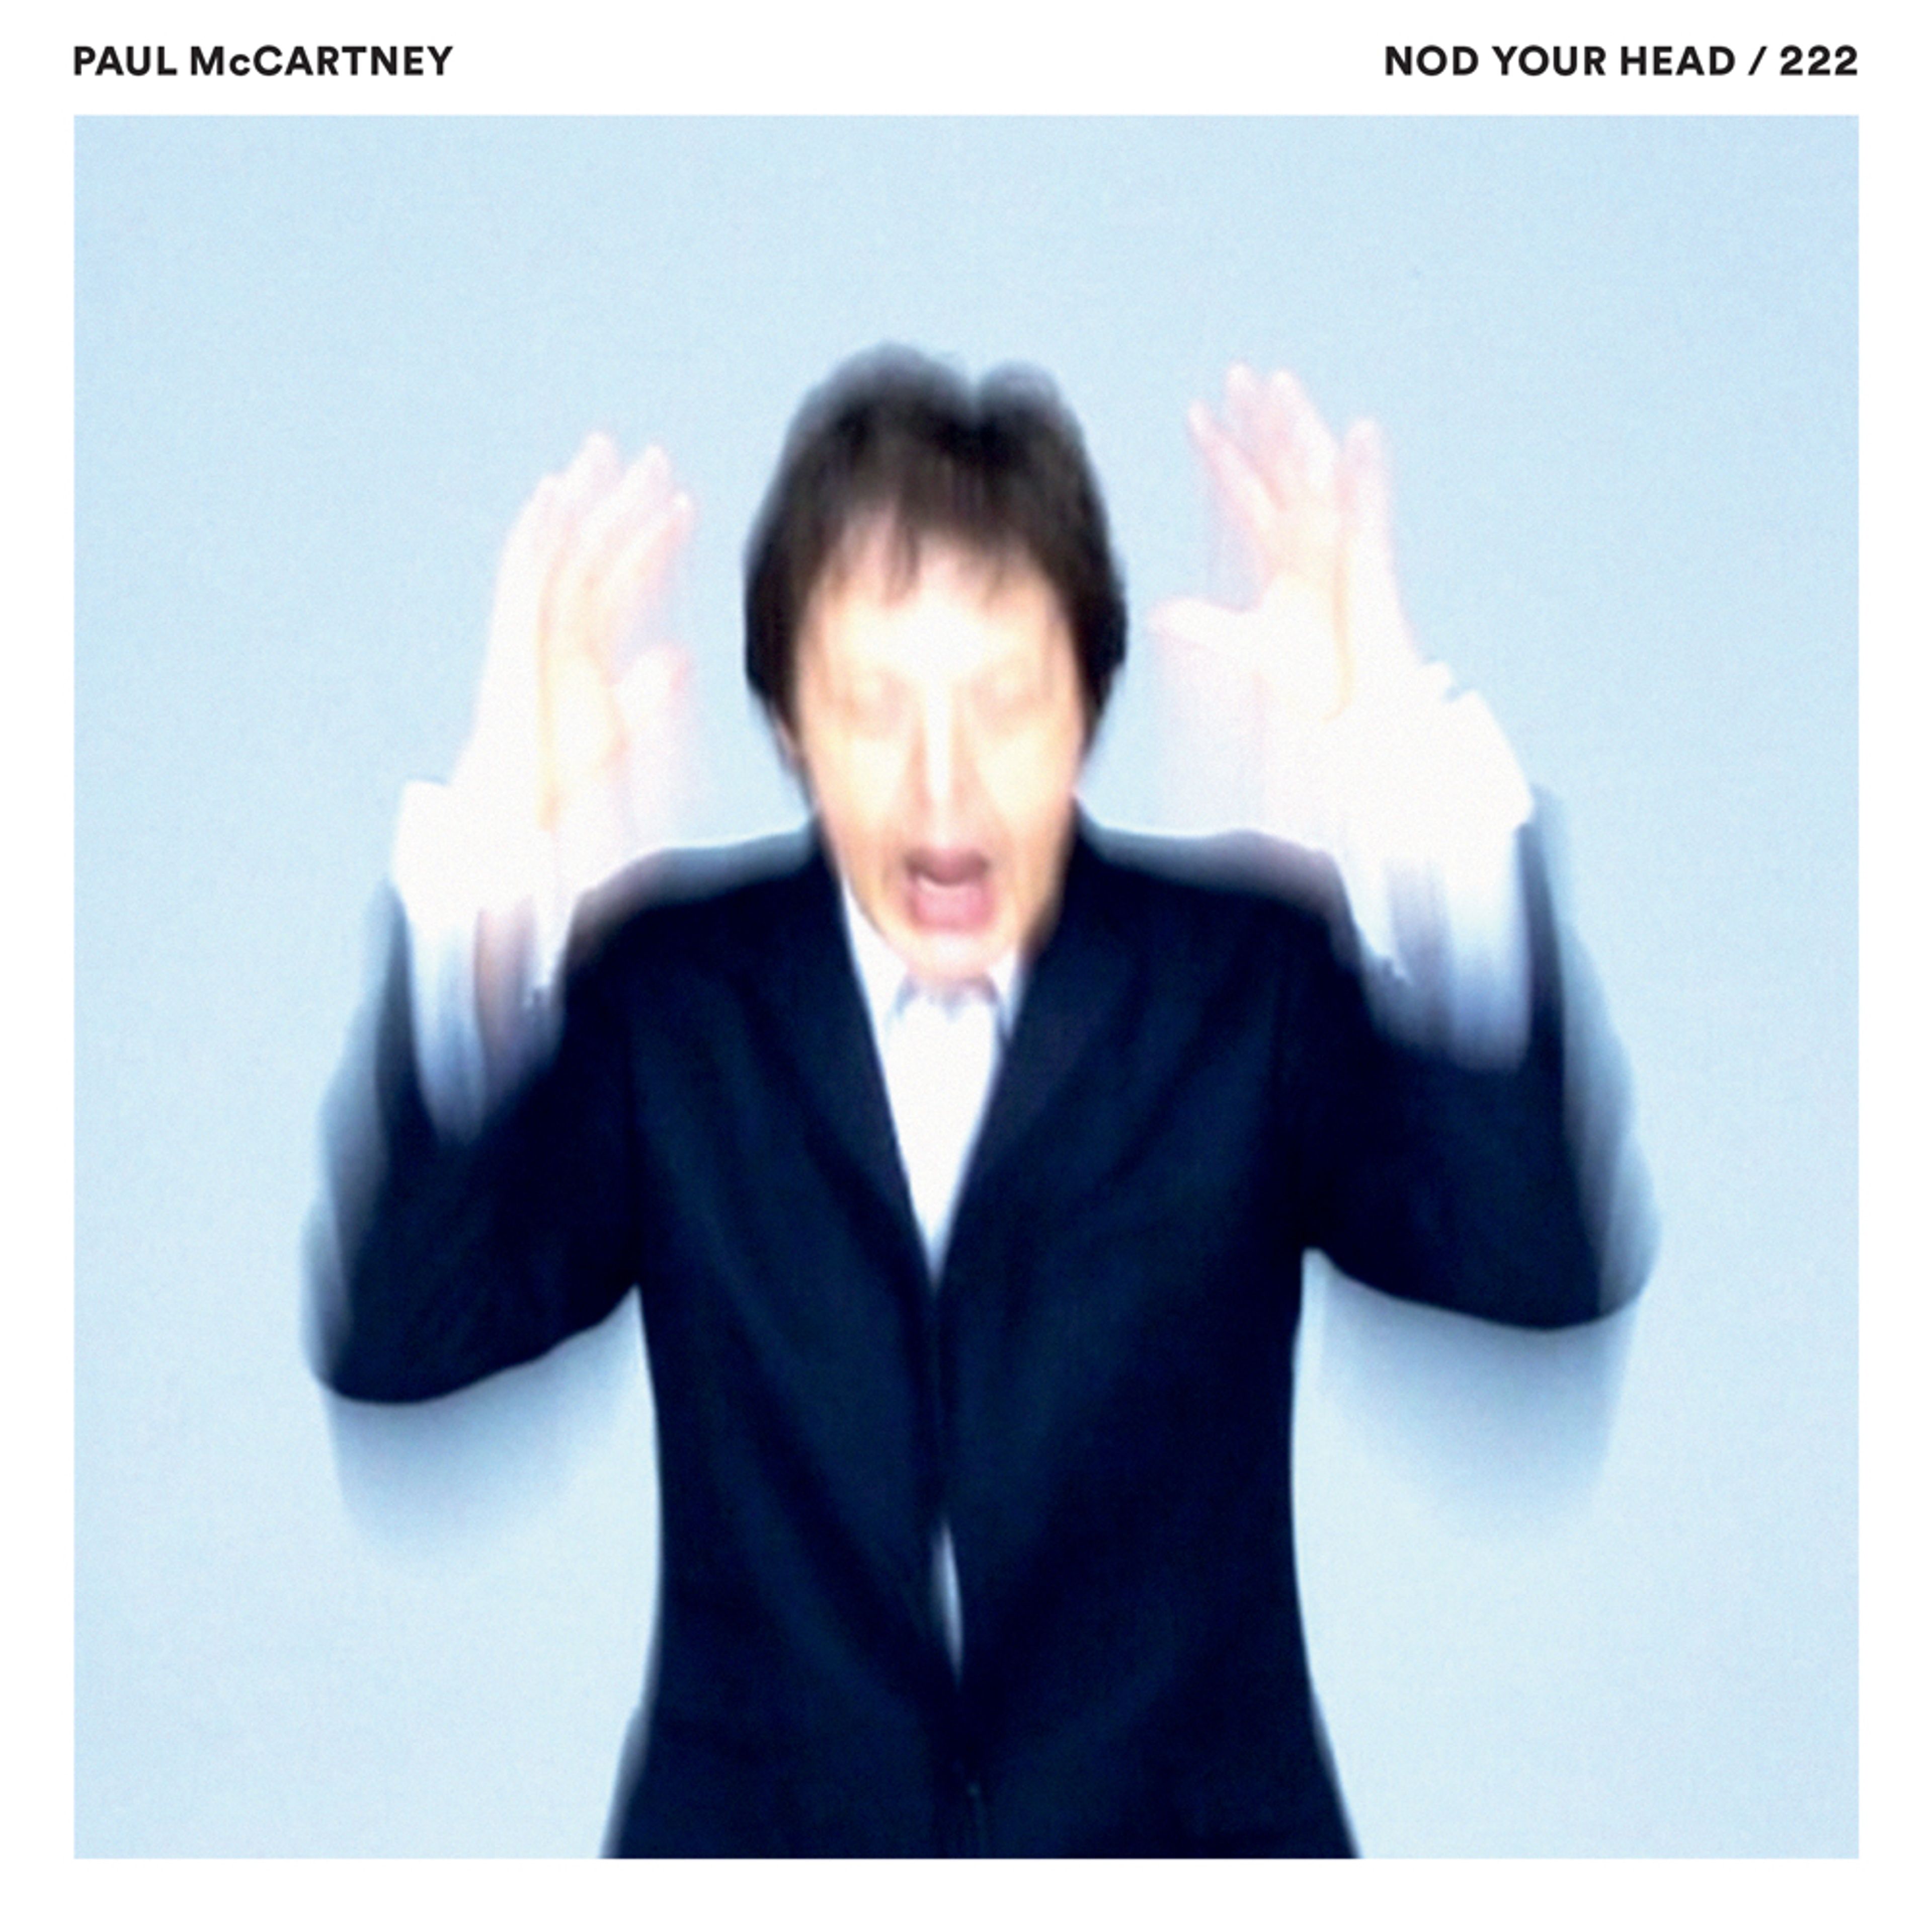 “Nod Your Head” Single artwork as featured in 'The 7" Singles Box'